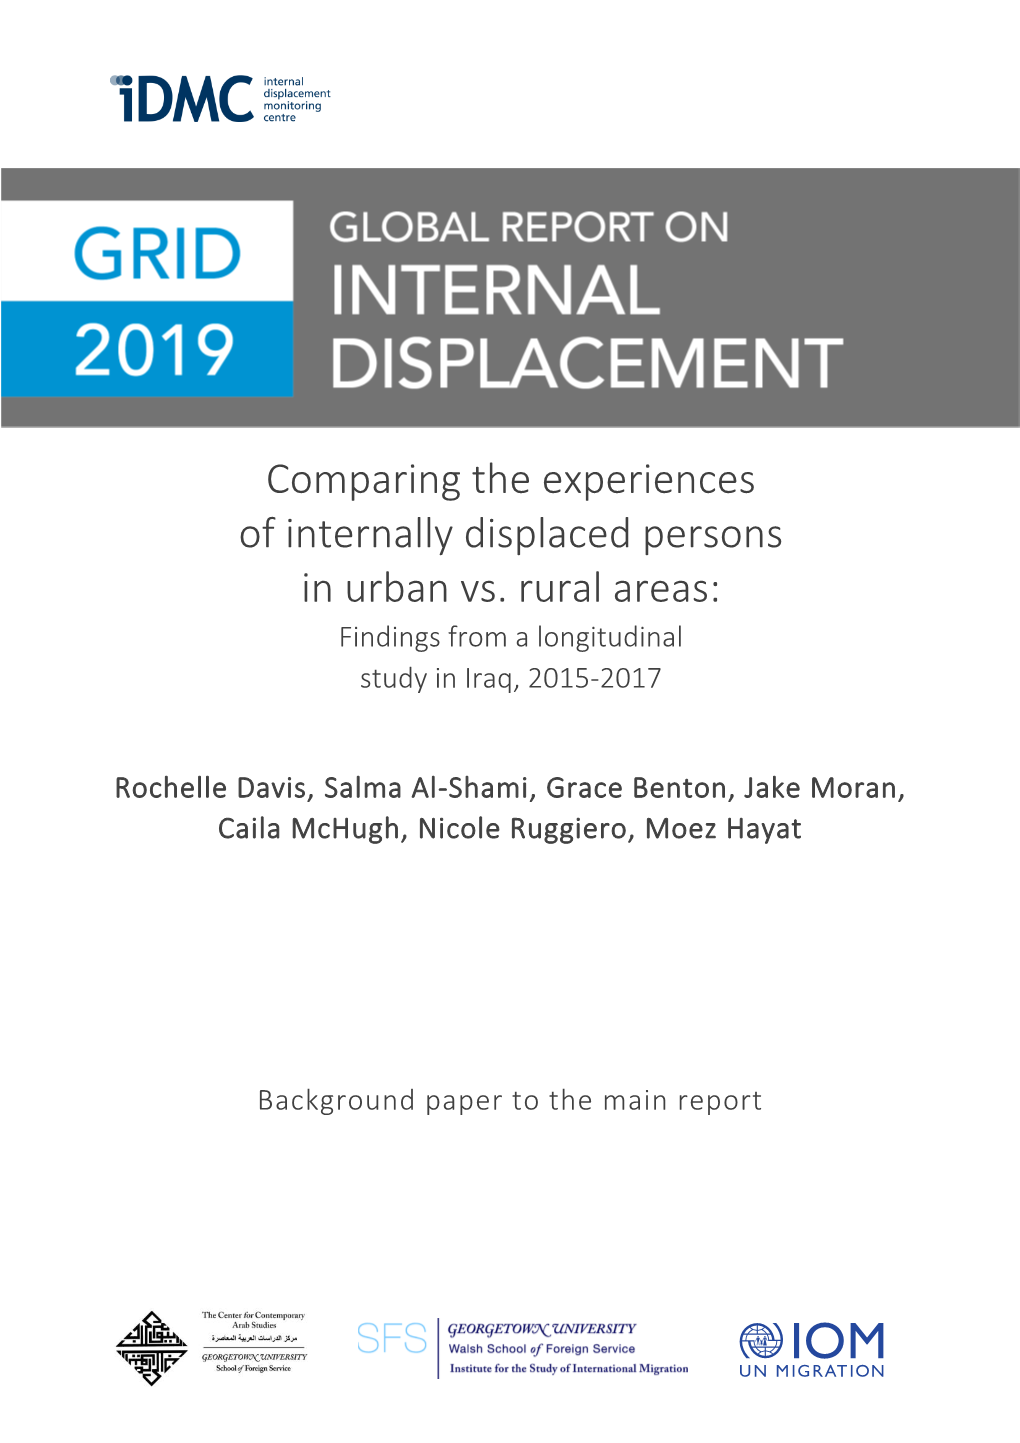 Comparing the Experiences of Internally Displaced Persons in Urban Vs. Rural Areas: Findings from a Longitudinal Study in Iraq, 2015-2017